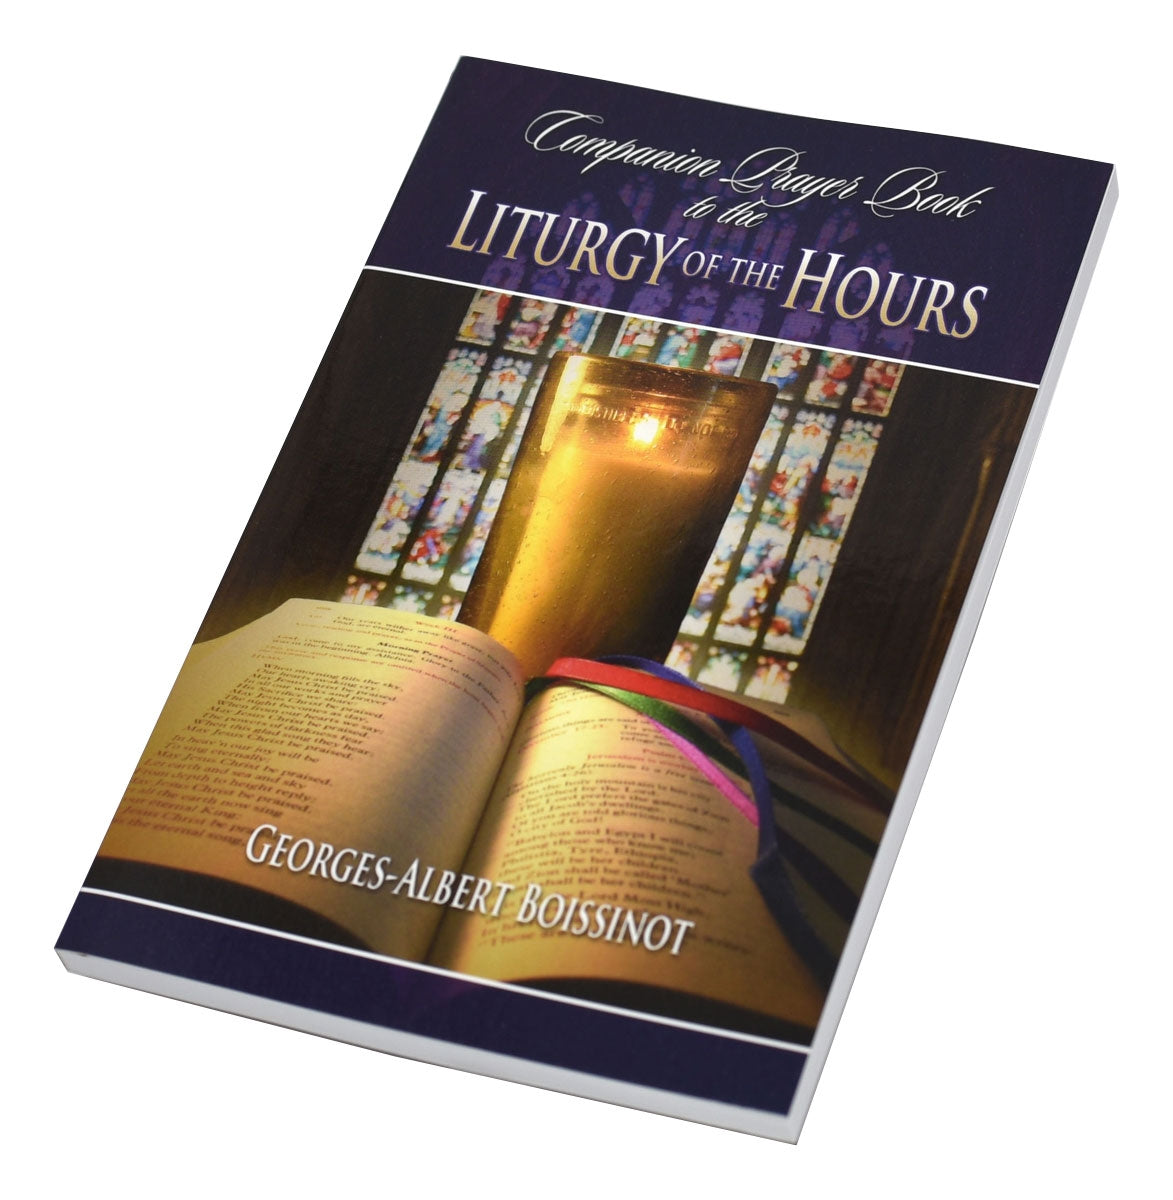 The Companion Prayer Book to the Liturgy of the Hours